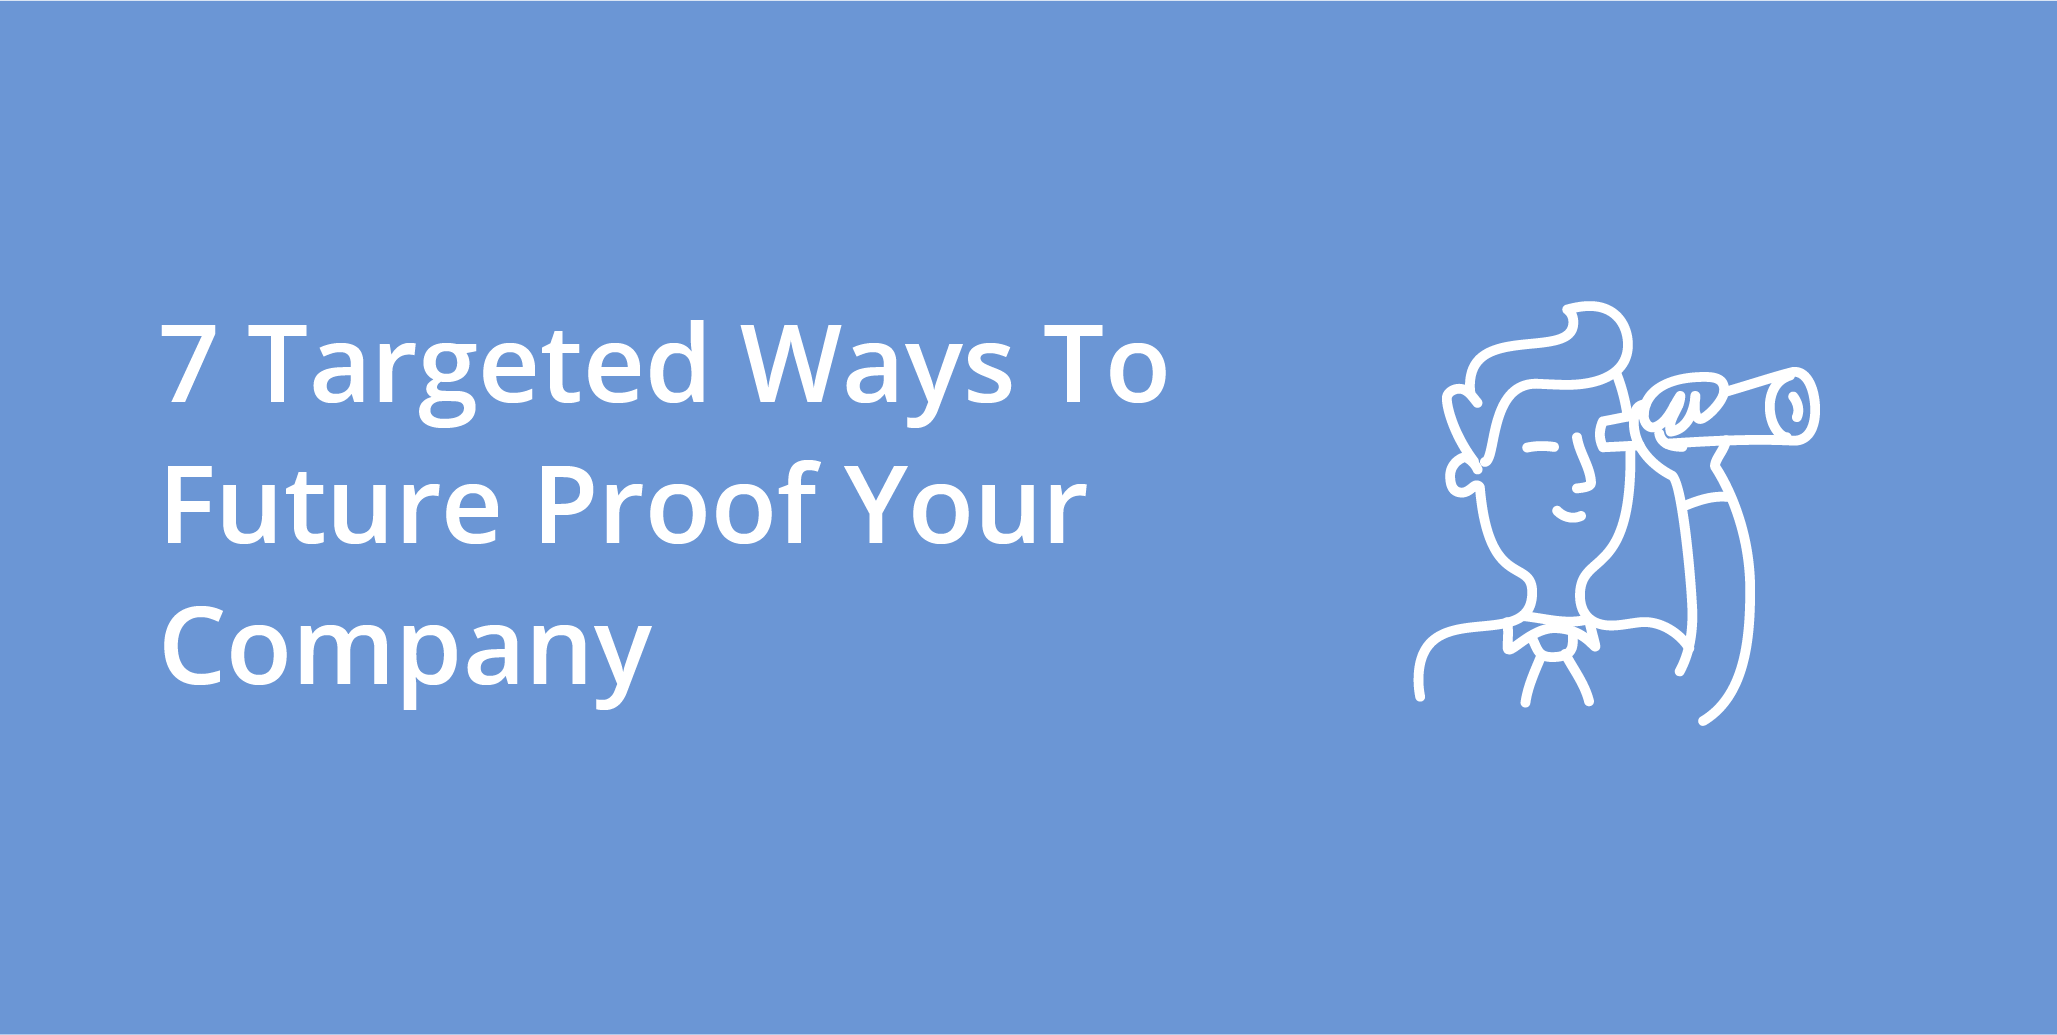 7 Targeted Ways To Future Proof Your Company